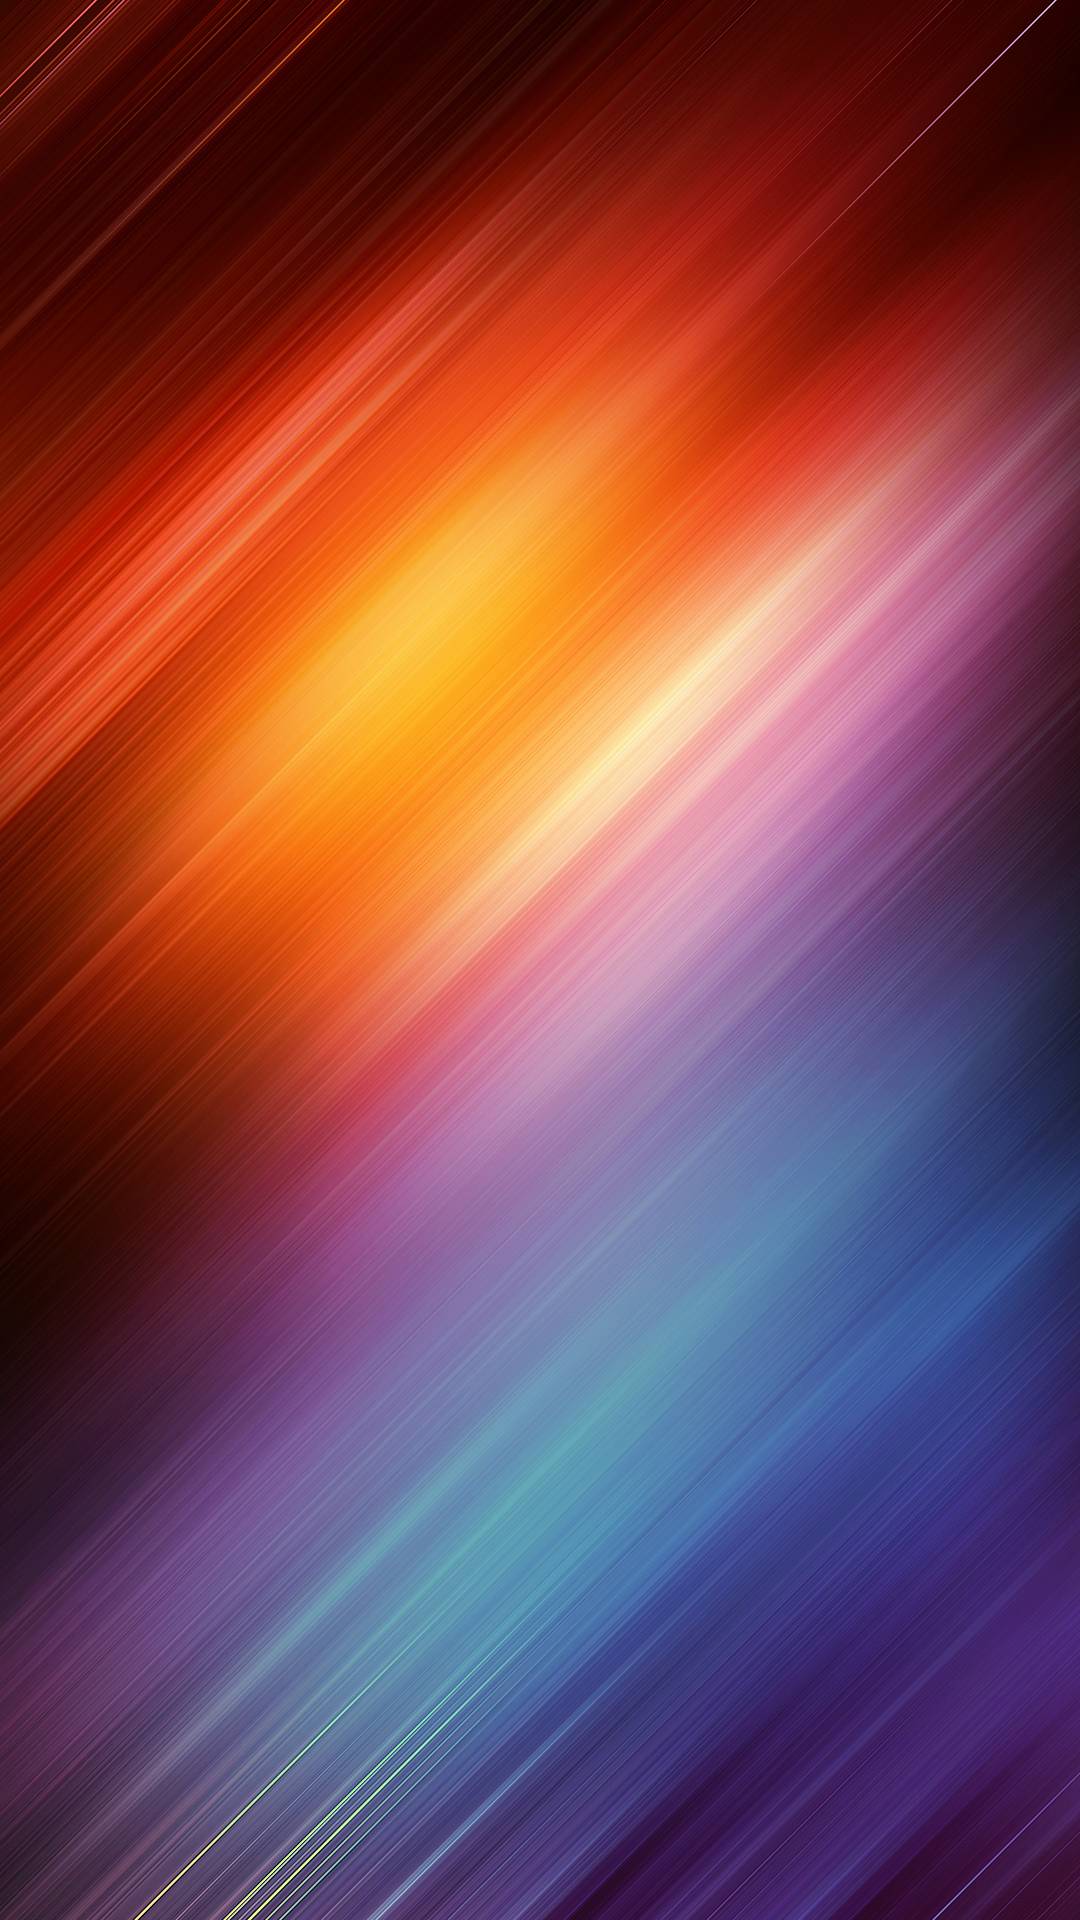 Wallpaper 1080x1920 for desktop and mobile